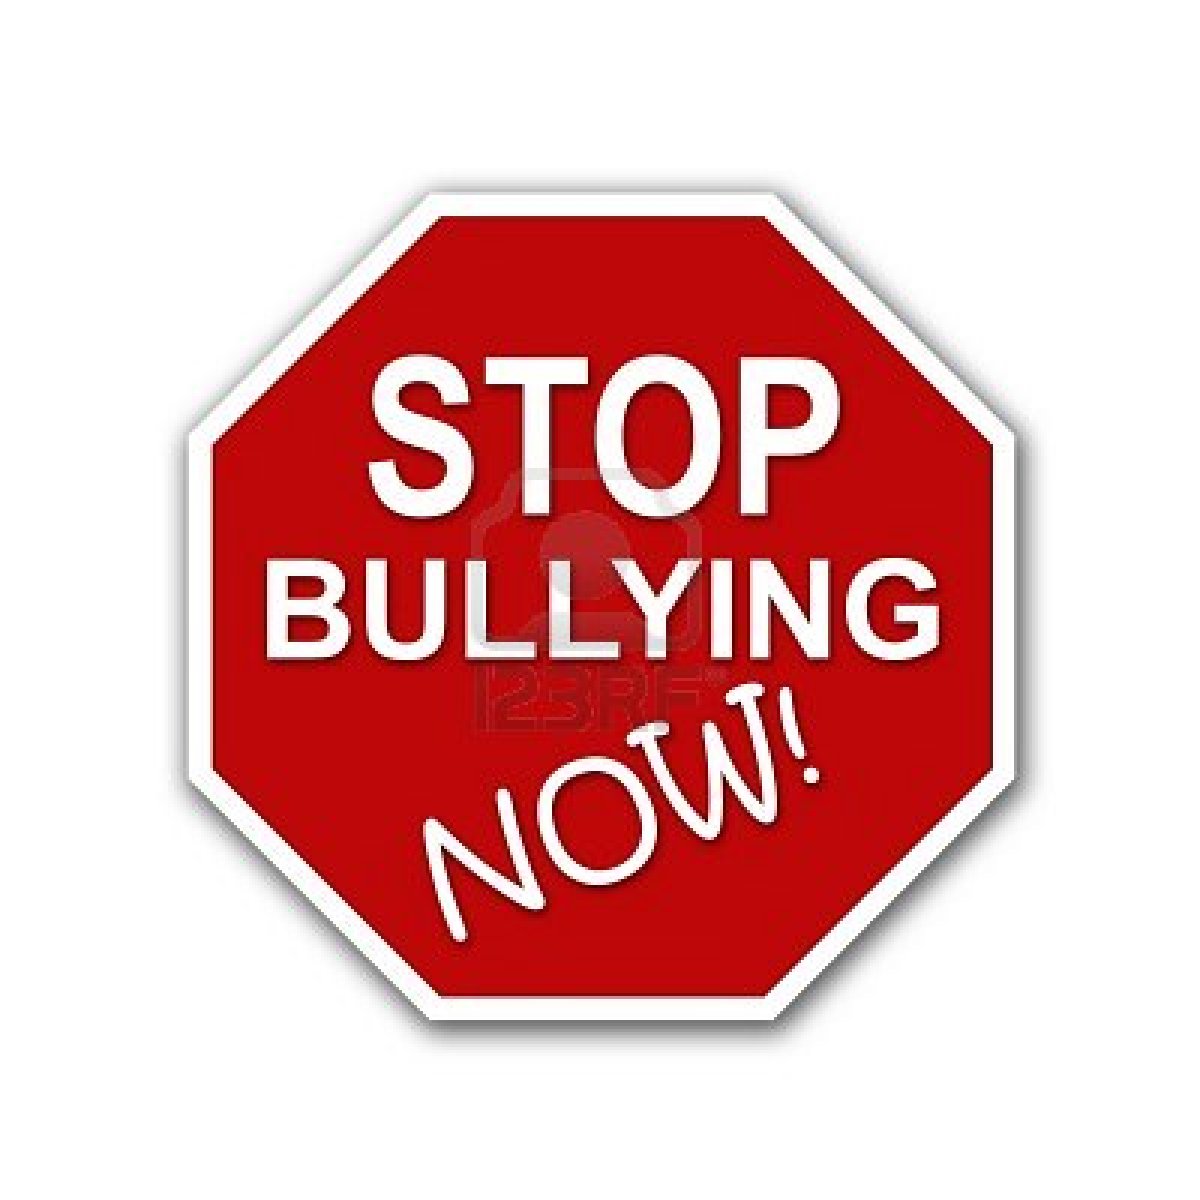 Gallery For   Abou Tcyber Bullying Clip Art